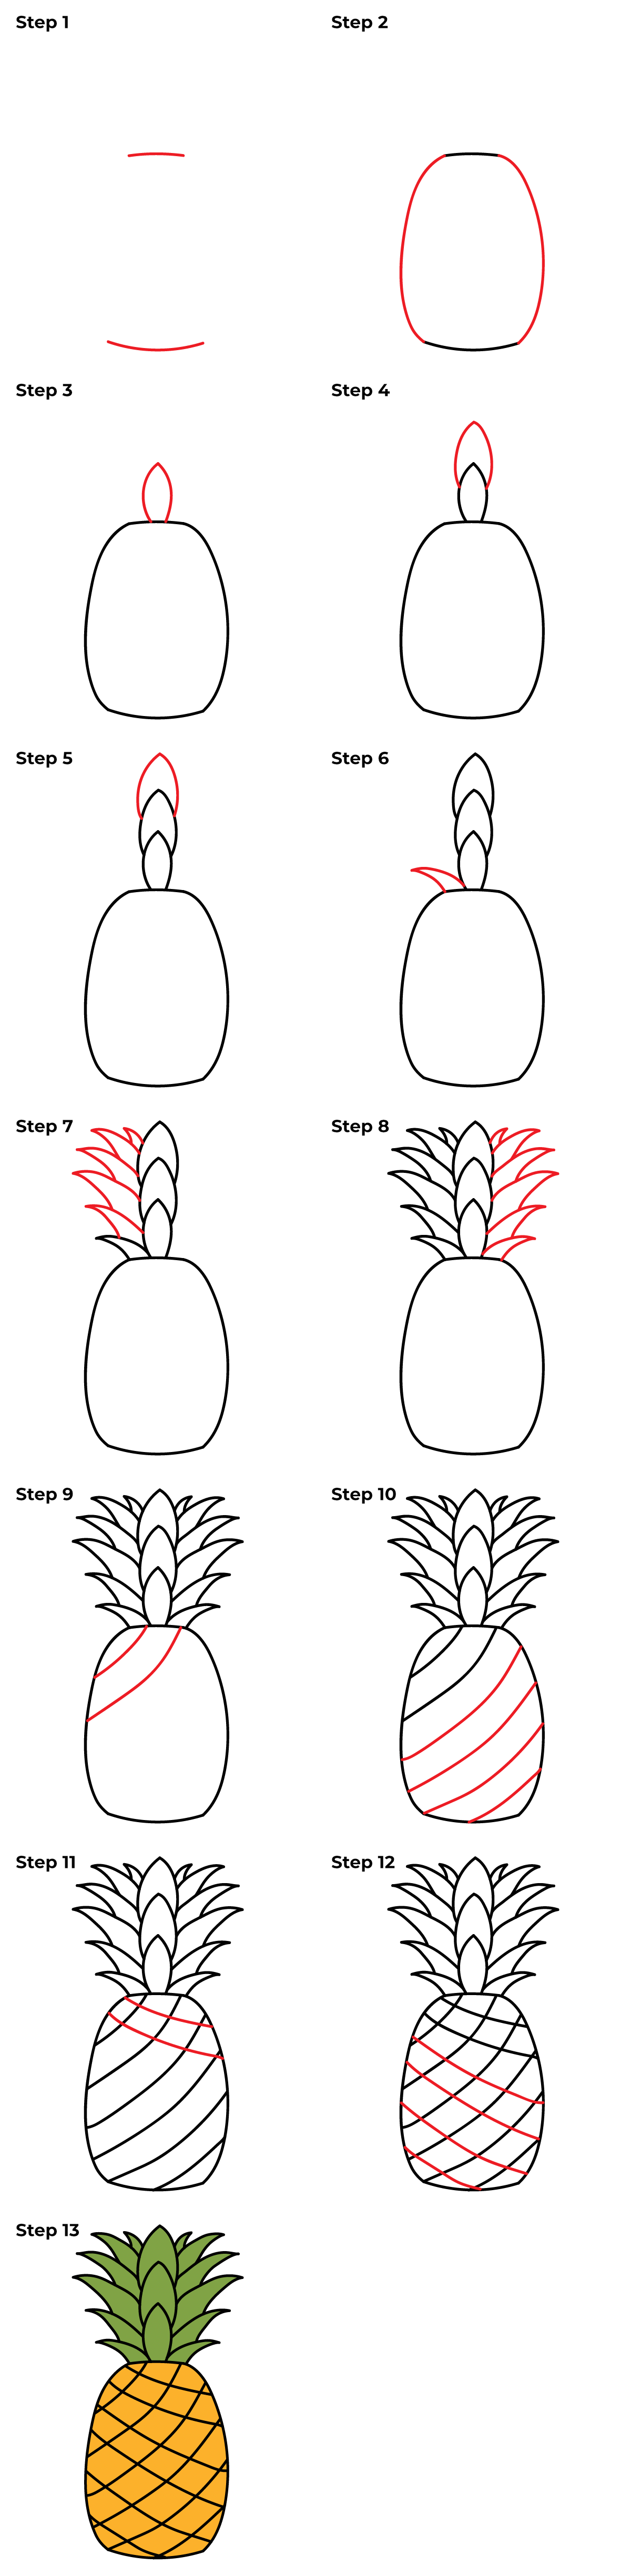 How to Draw a Pineapple - Printable Tutorial